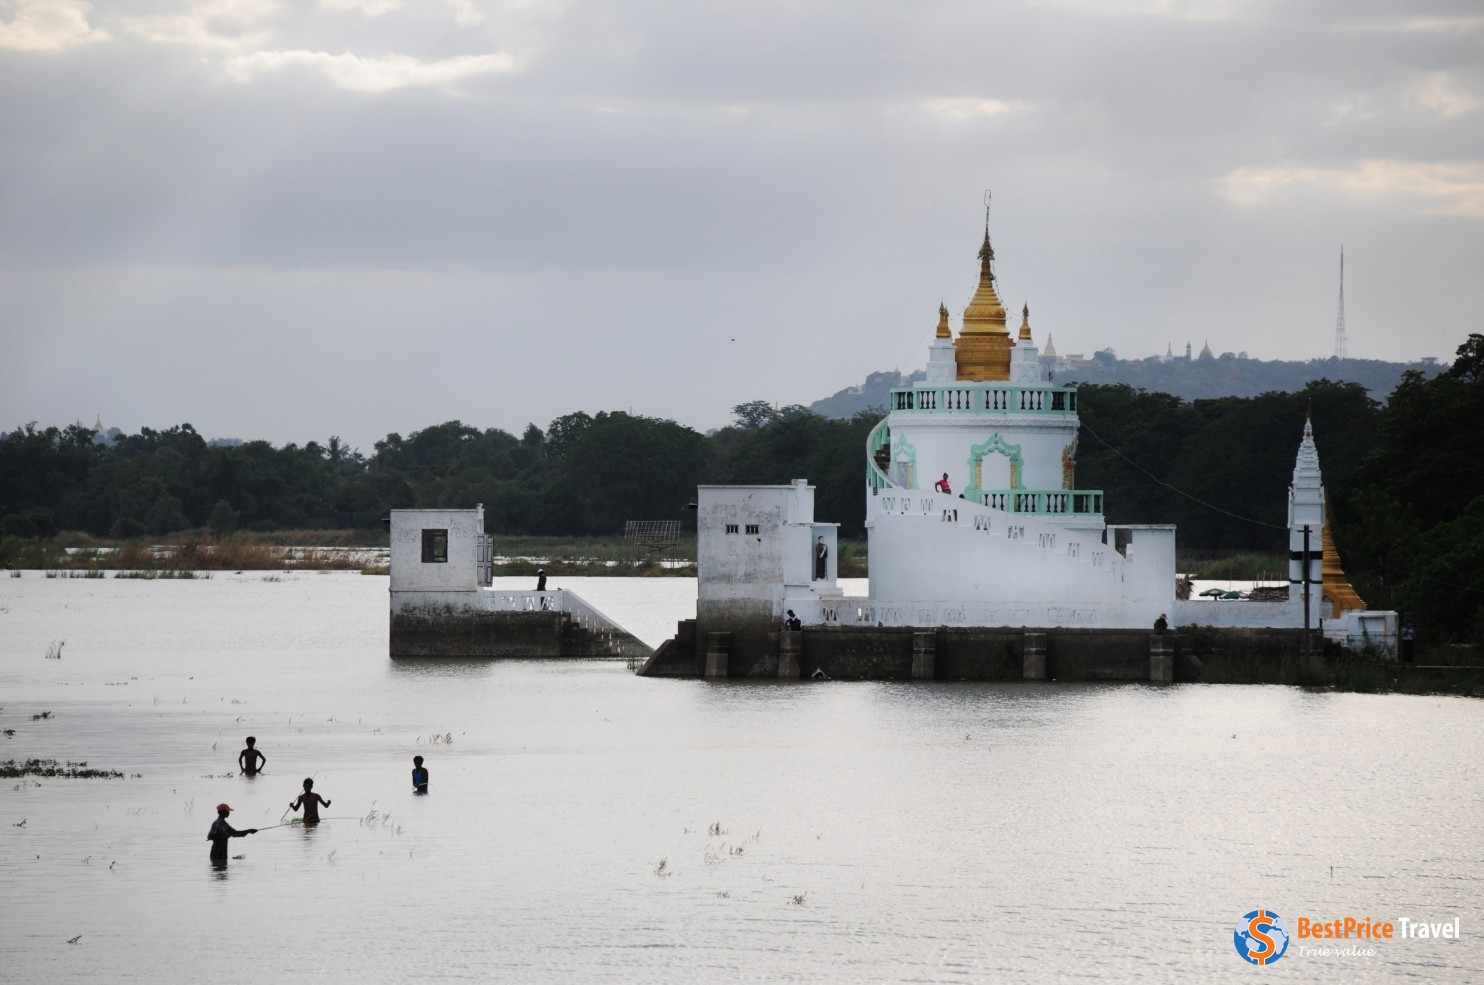 Fishermen Cast Their Lines Near A Pagoda On Taungthaman Lake In The City Of Mandalay.